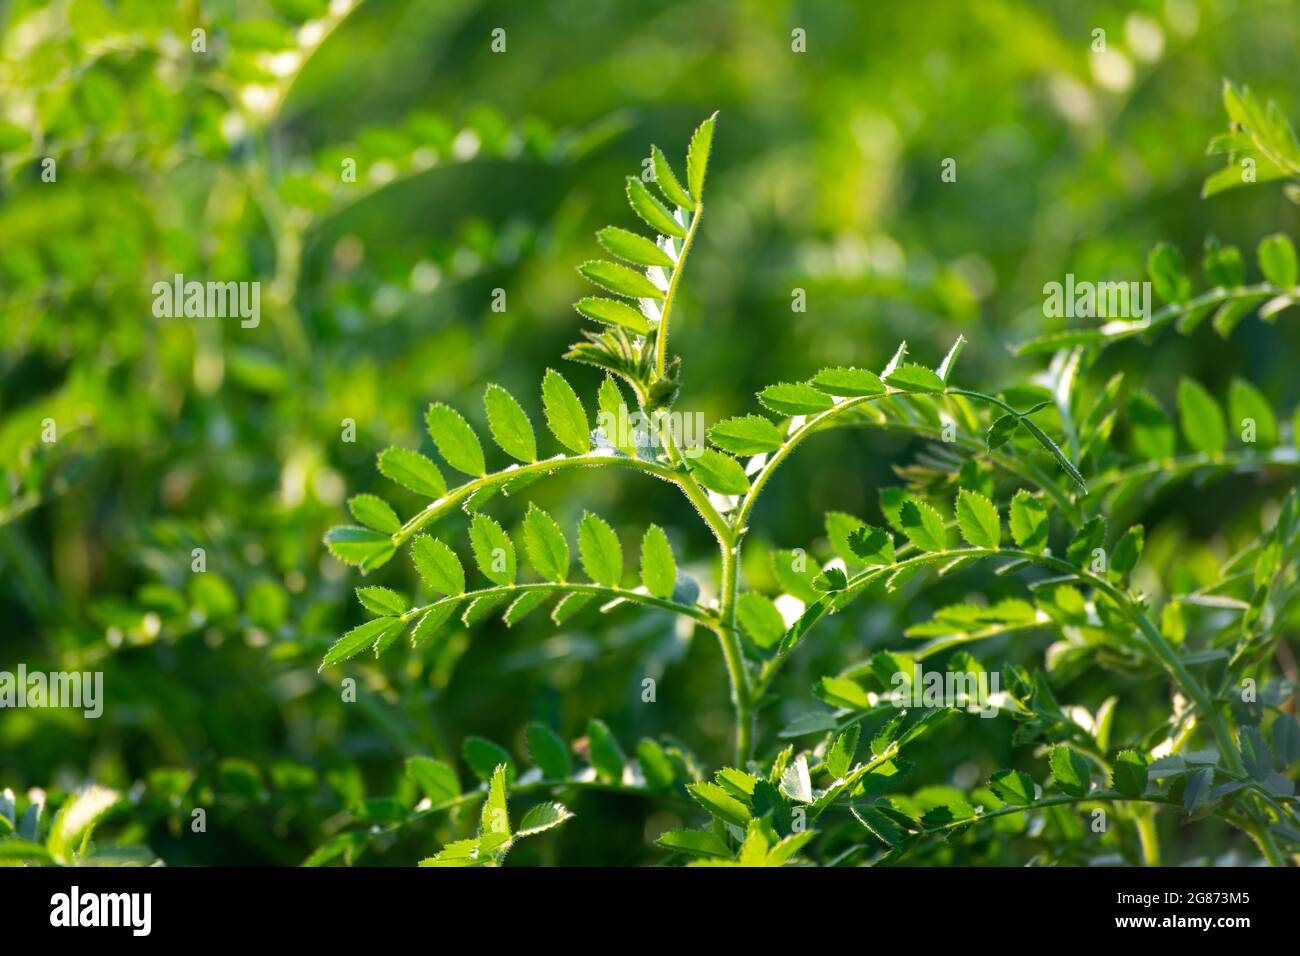 Green pods of chickpeas grow on a plant Stock Photo